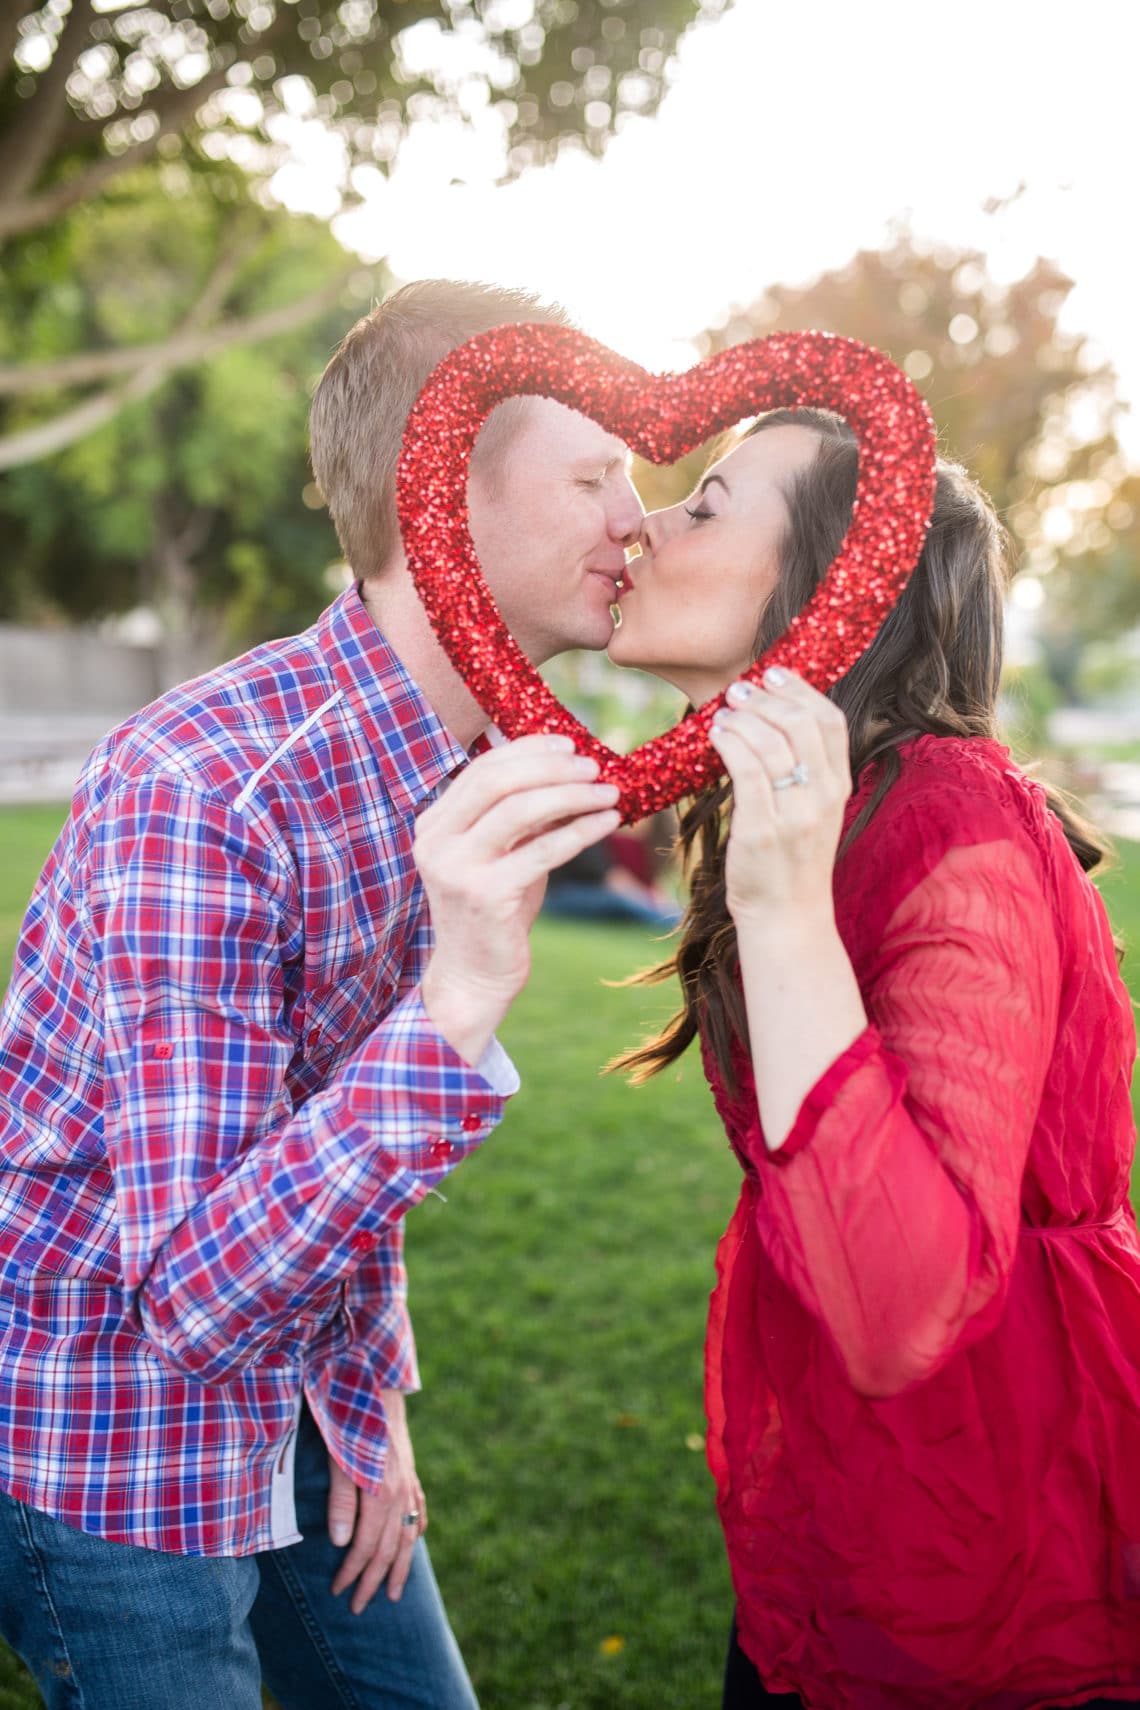 Valentine’s Day Date Ideas for Any Budget